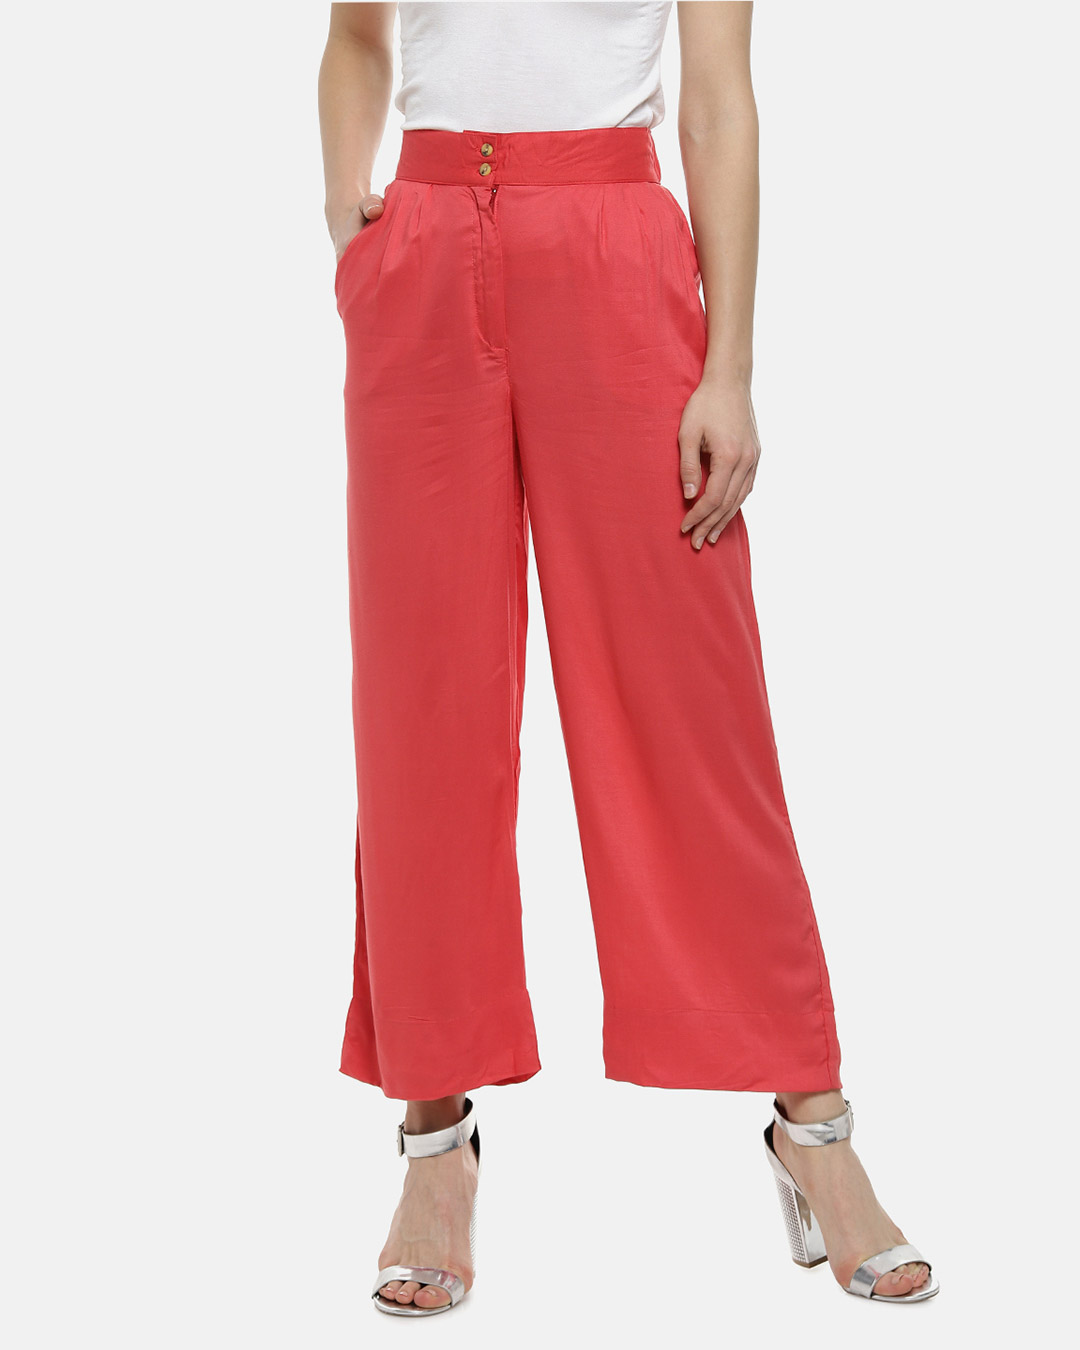 Trending and Latest Trousers Designs for Ladies to Try | Libas